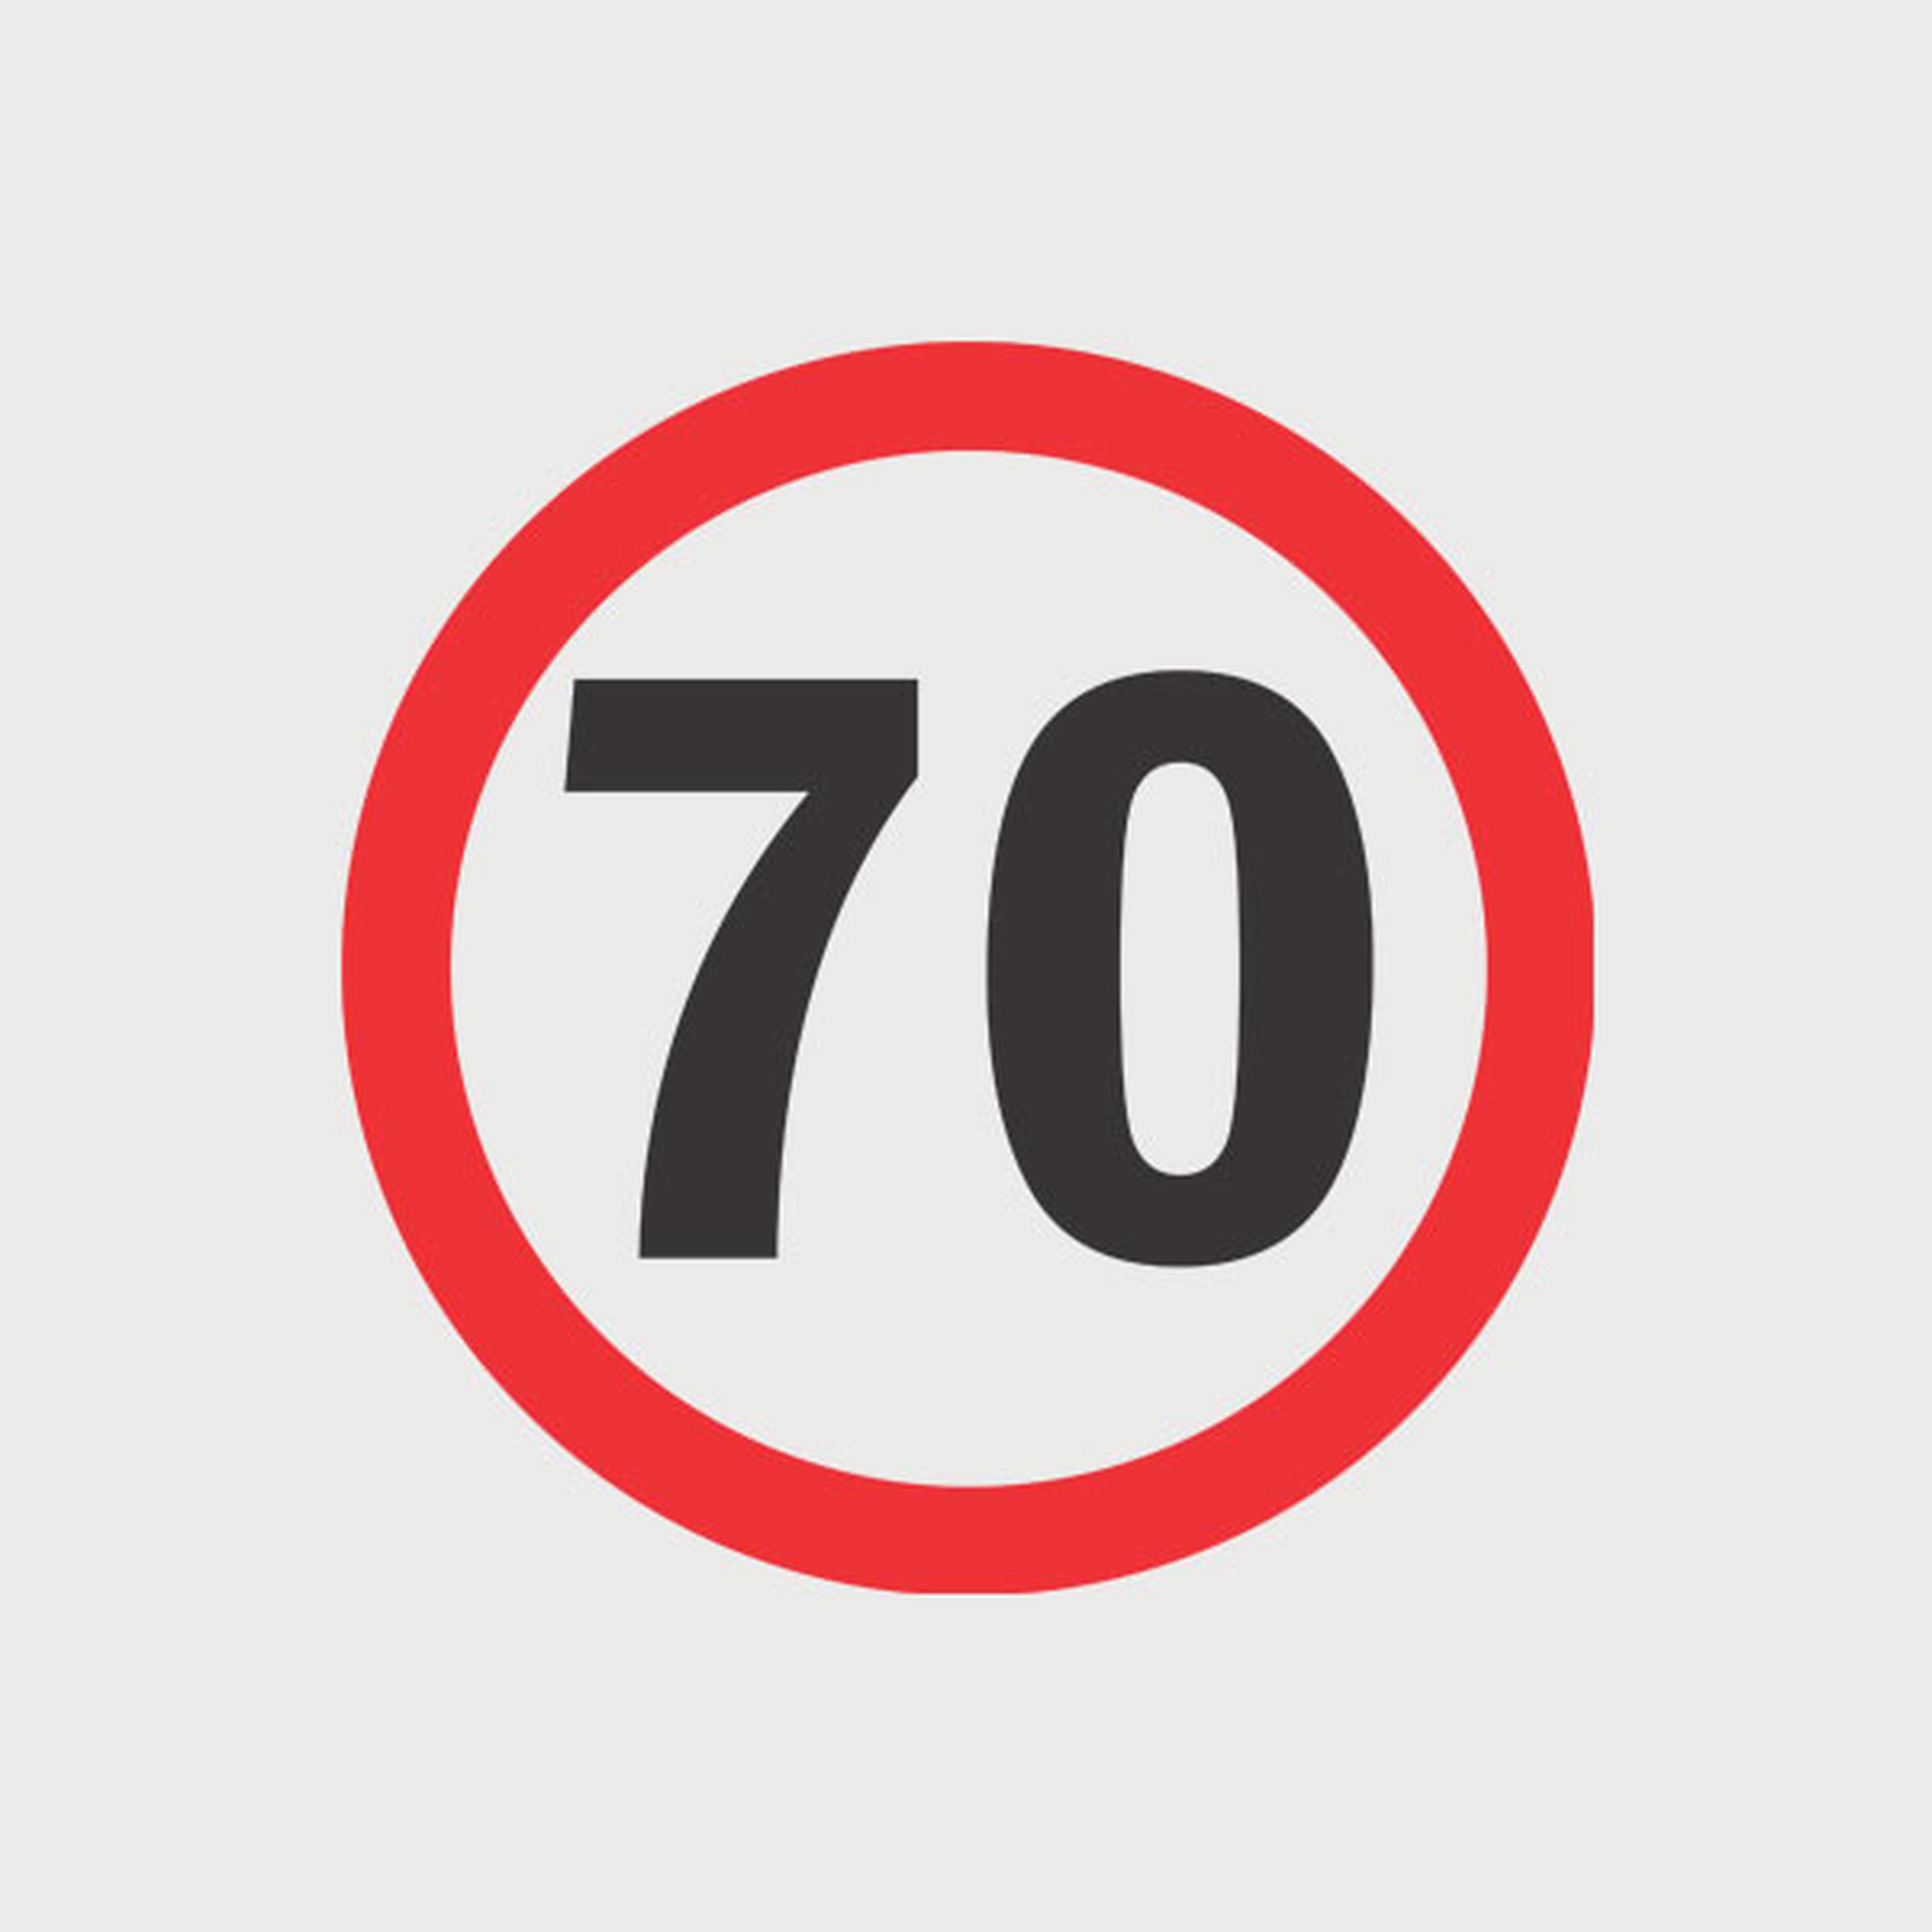 Road sign 70